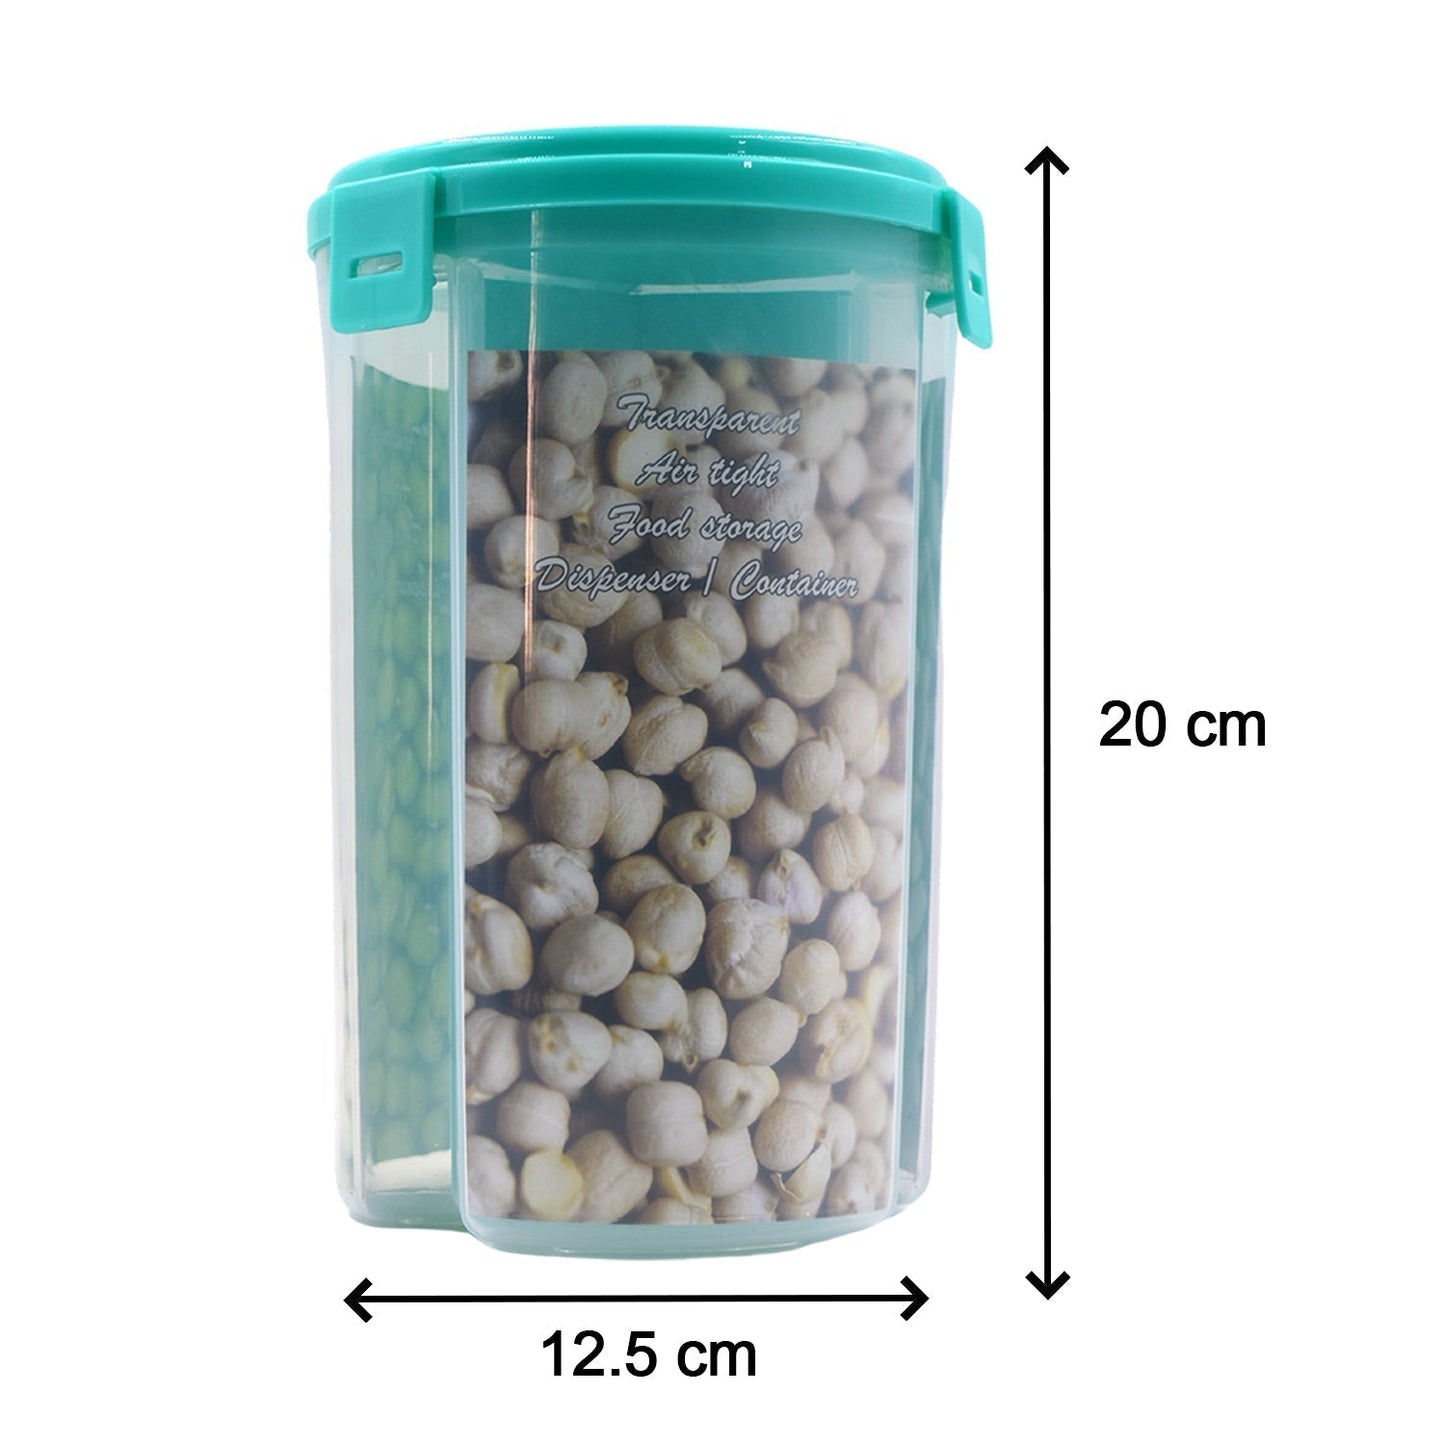 3 SECTION AIR TIGHT STORAGE CONTAINER 1500ML